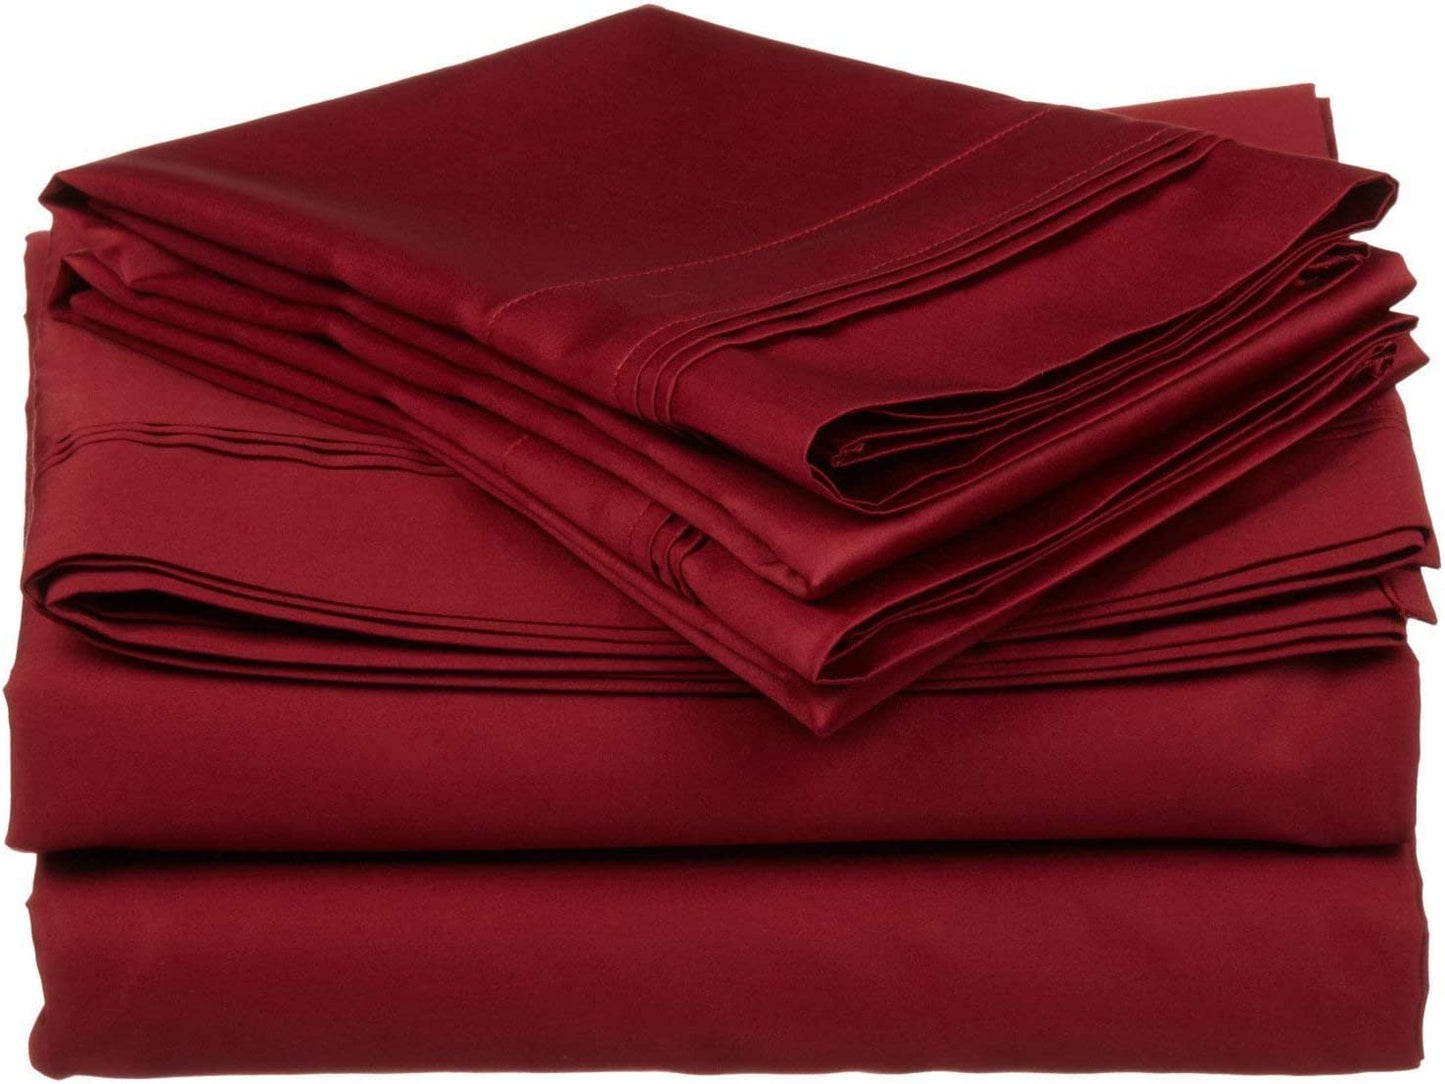 12 Inch Pocket Fitted Sheet Burgundy 1000TC Egyptian Cotton at-EgyptianHomeLinens.com